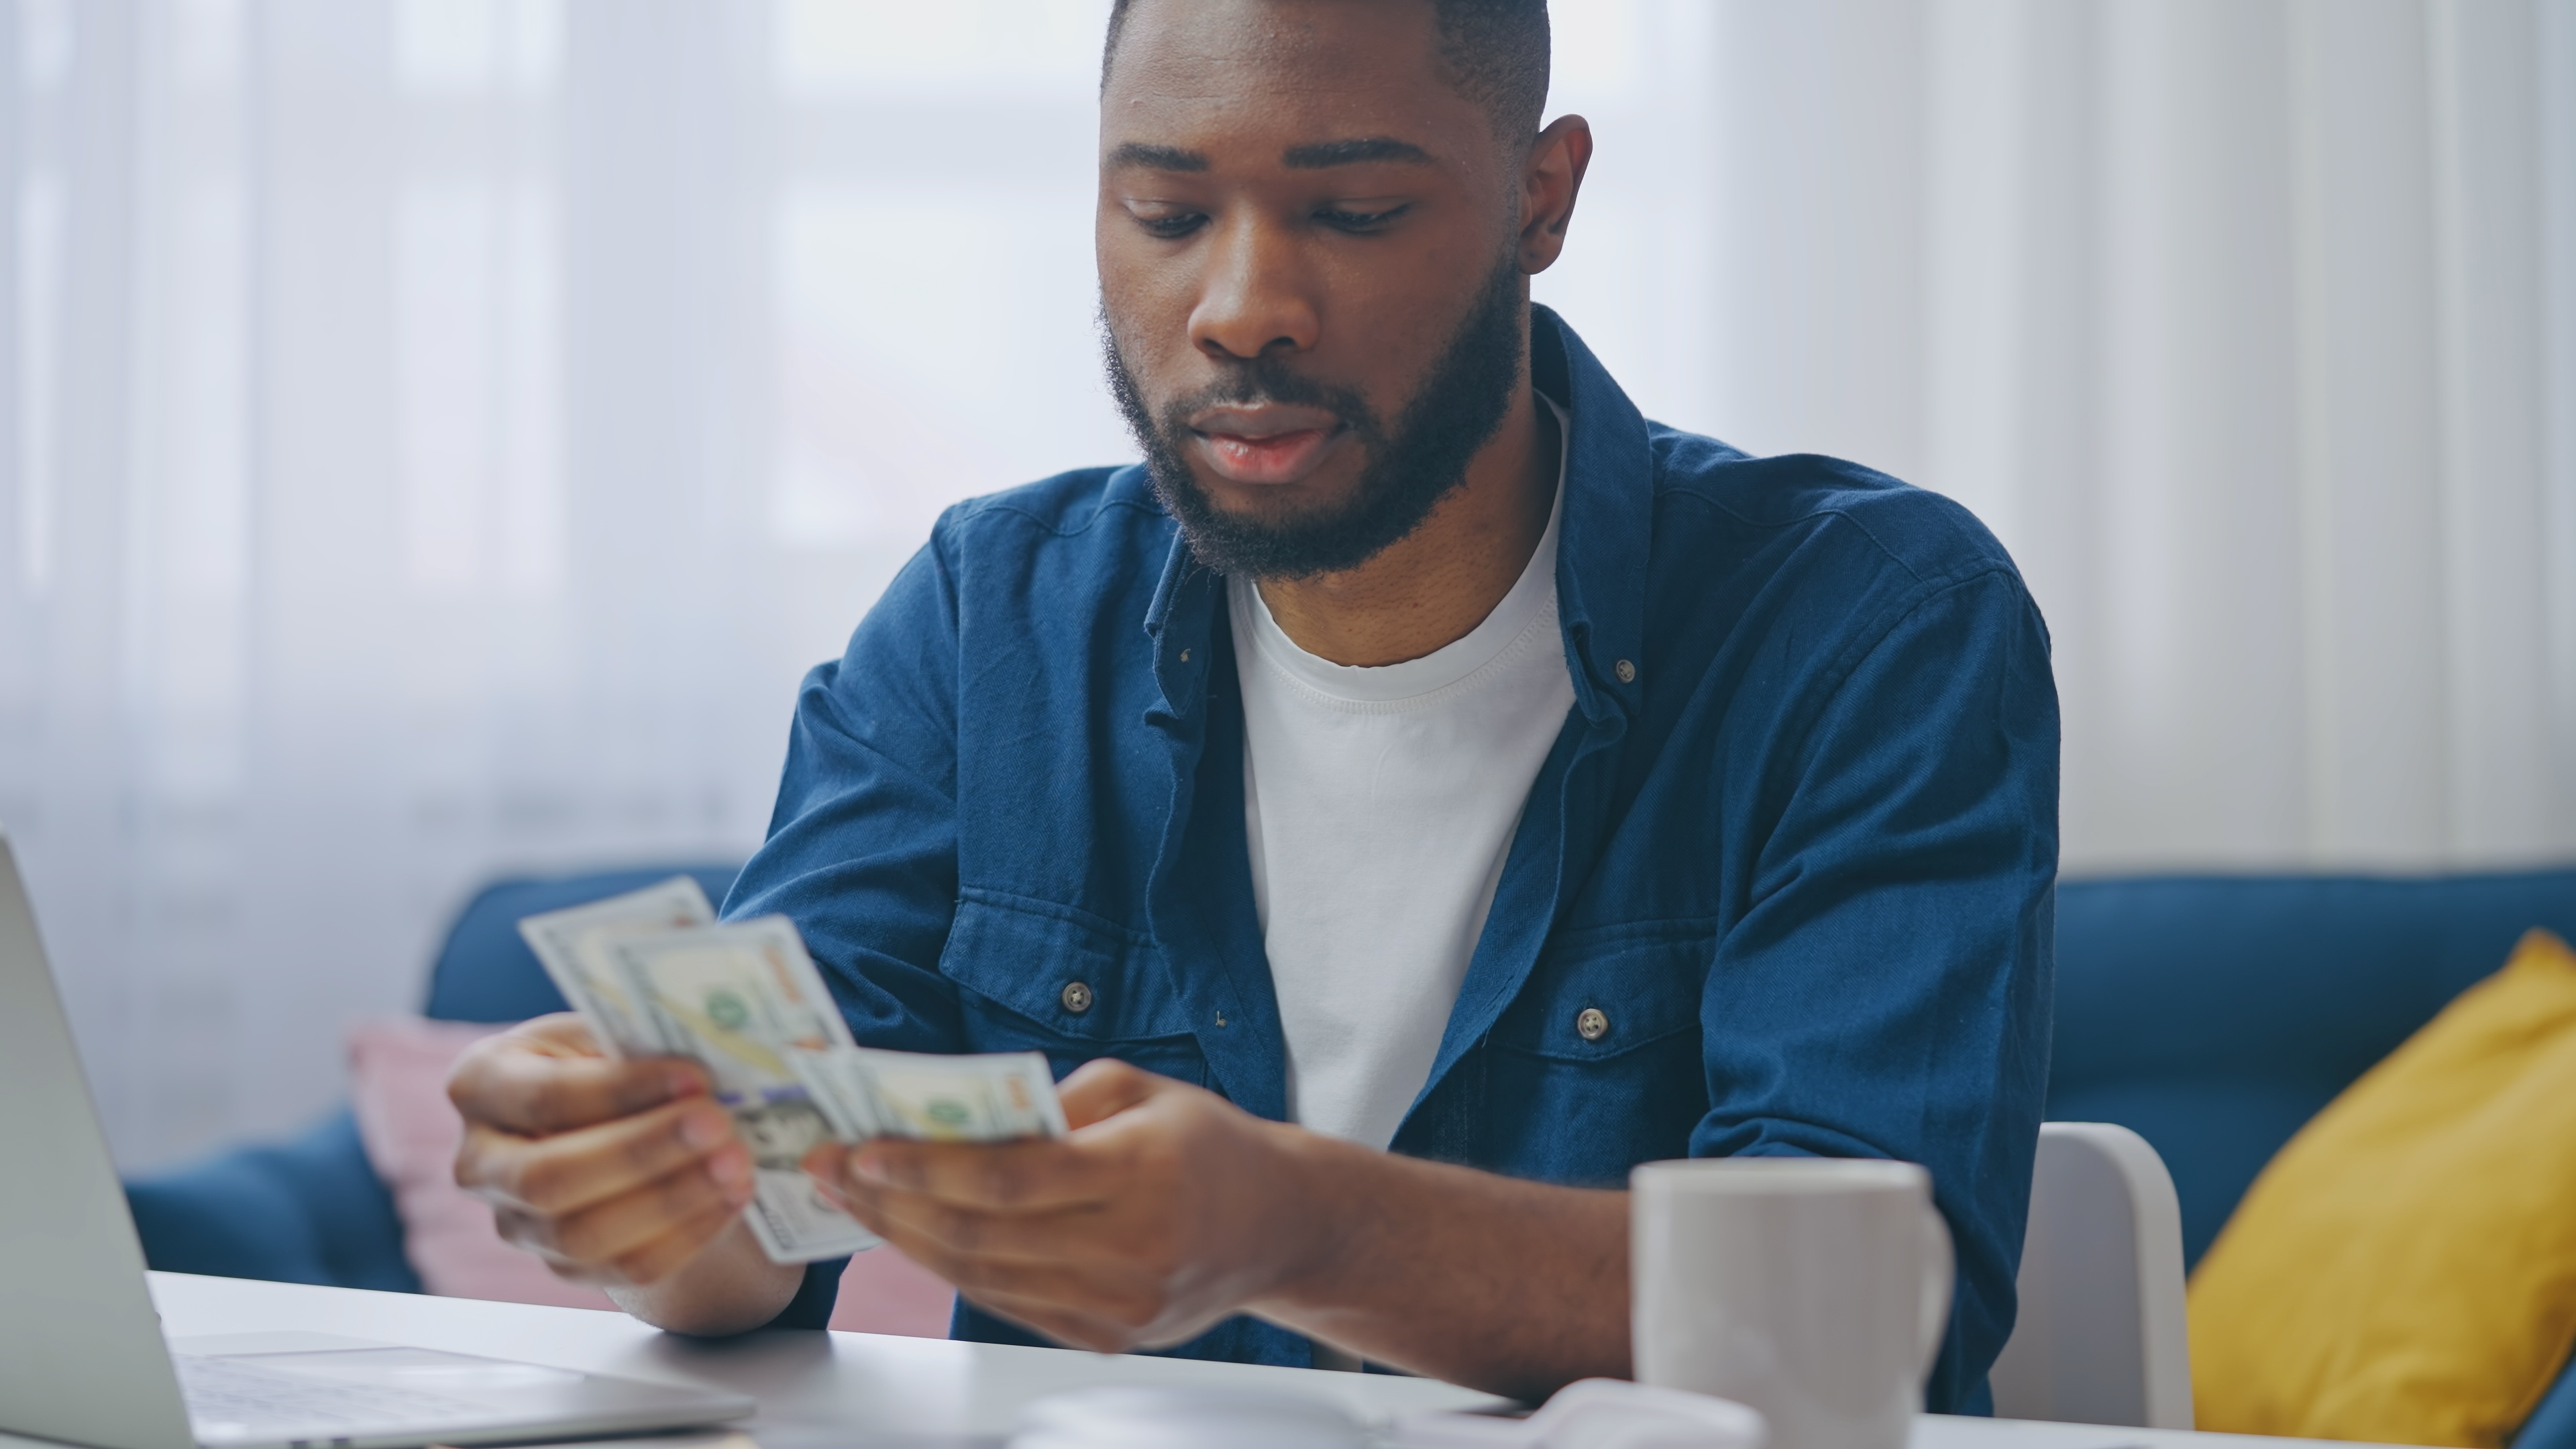 Want to get out of debt this year? Check your overspending